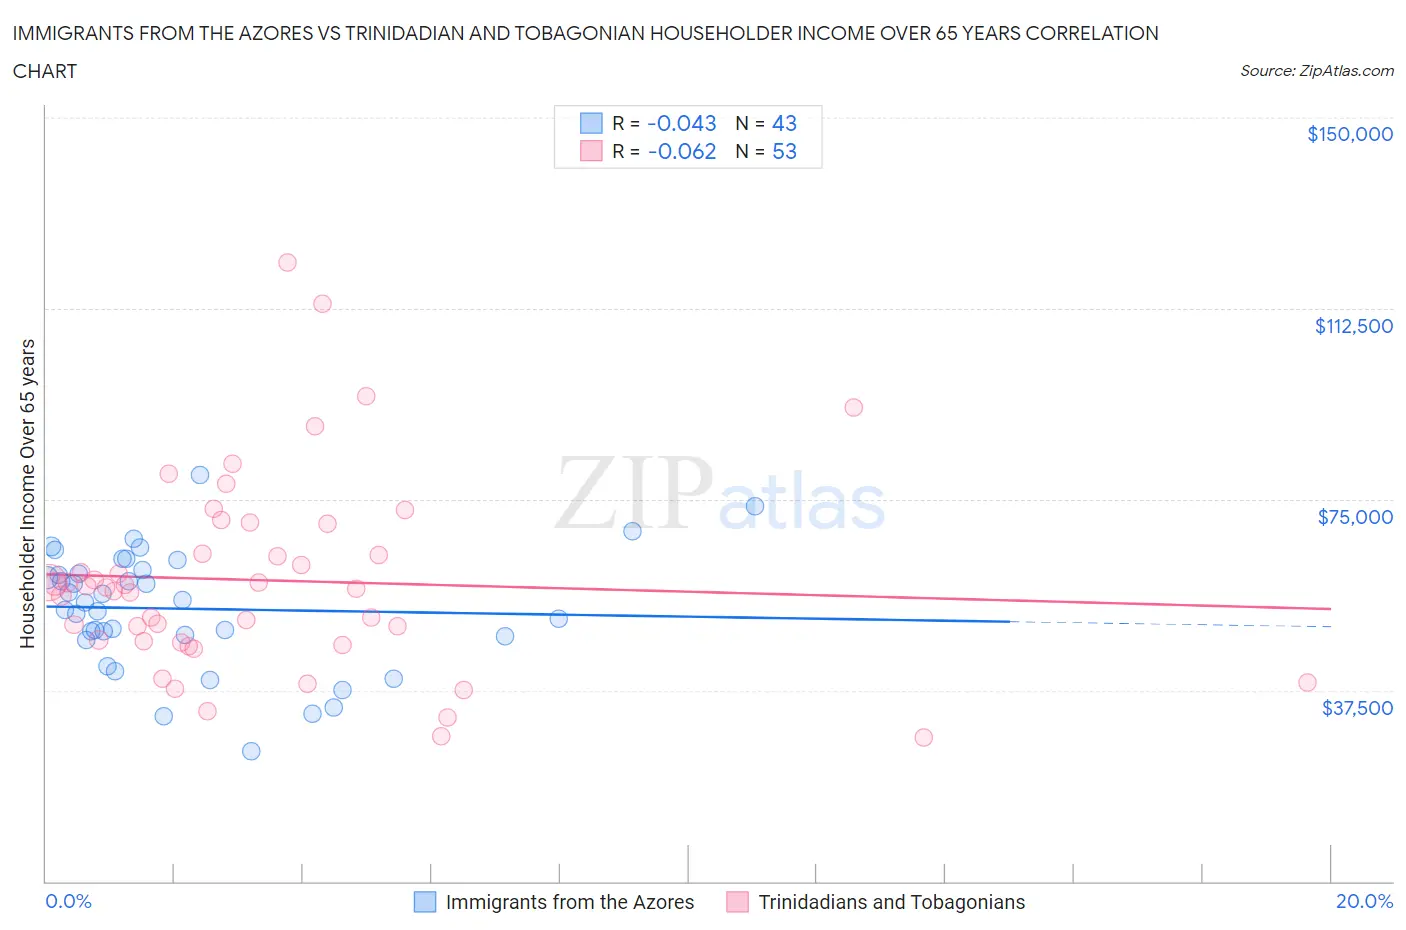 Immigrants from the Azores vs Trinidadian and Tobagonian Householder Income Over 65 years